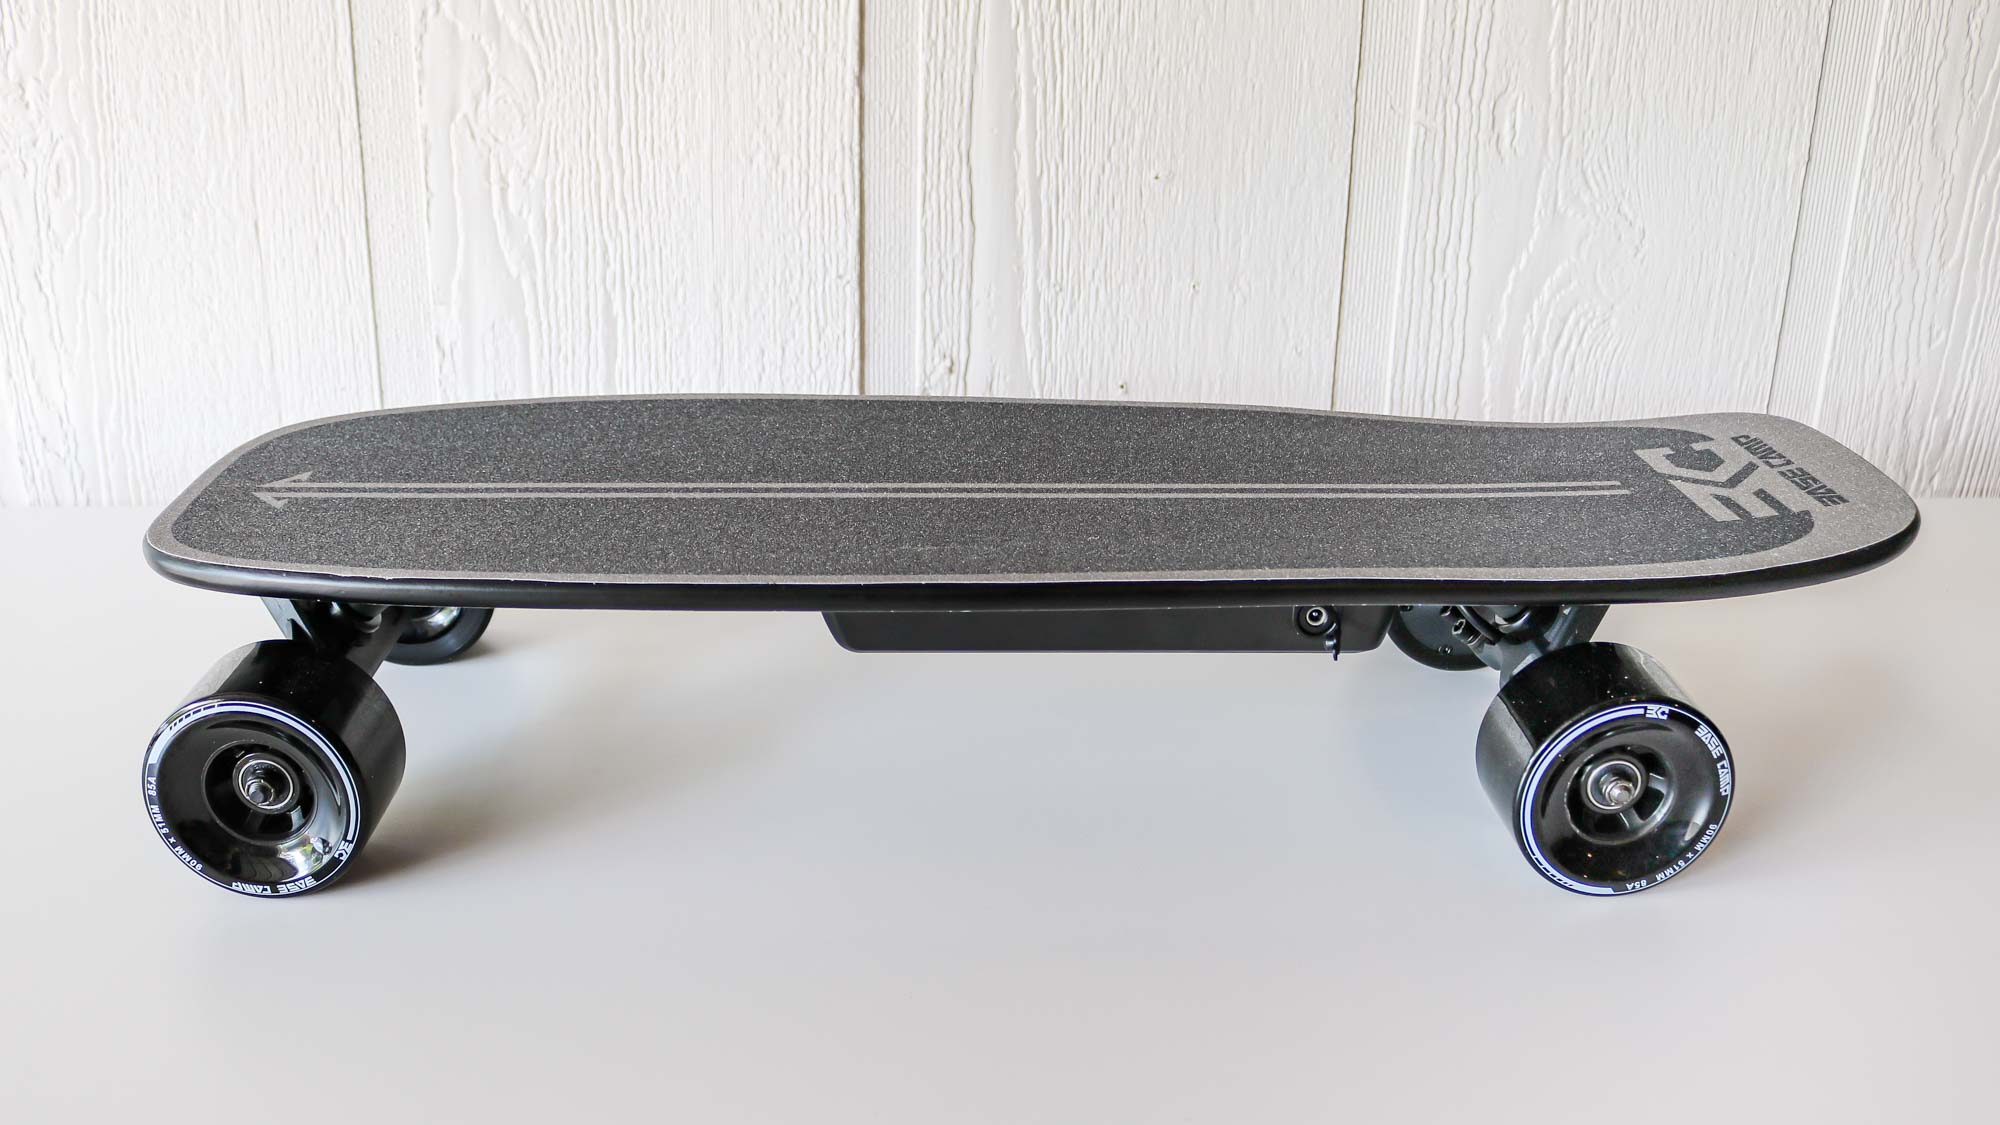 Side view of the Base Camp F11 electric skateboard